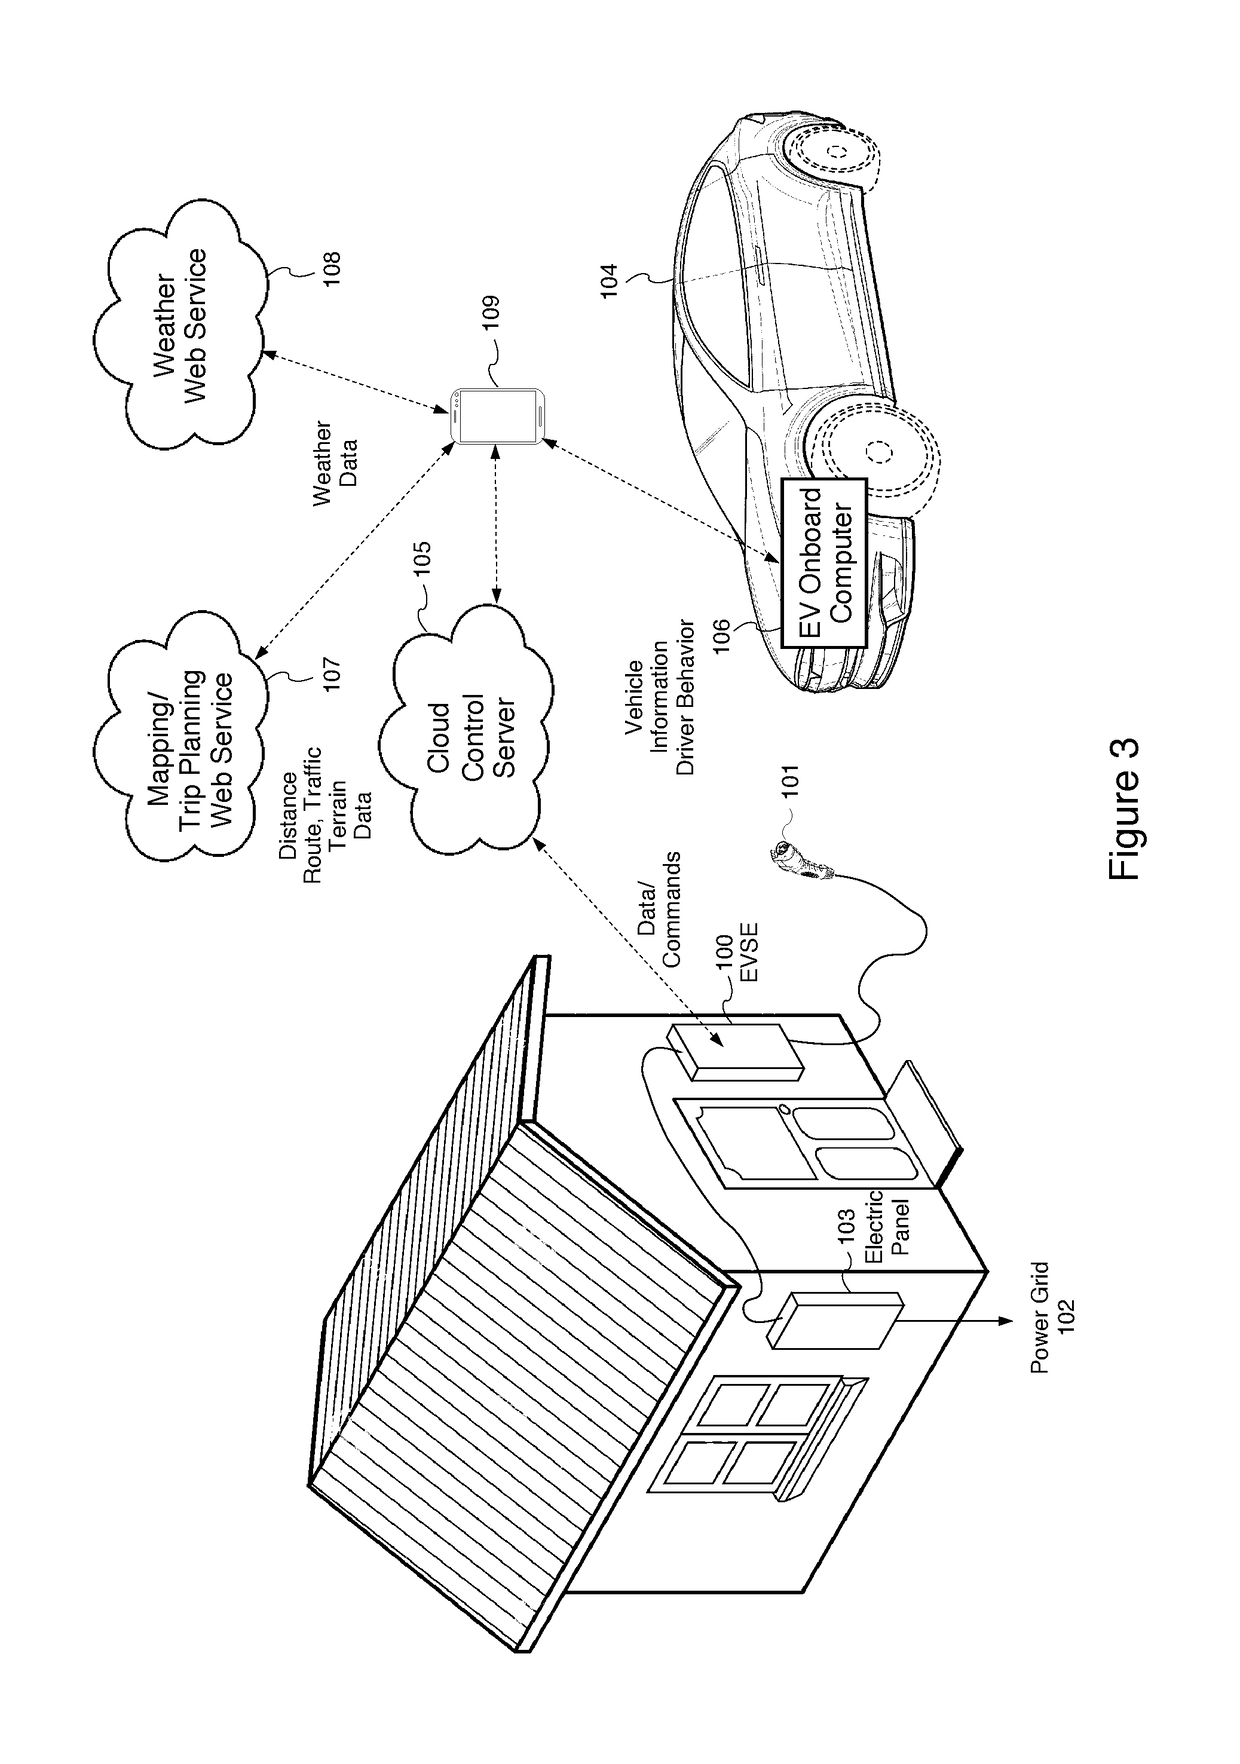 Systems and methods for electric vehicle charging with automated trip planning integration